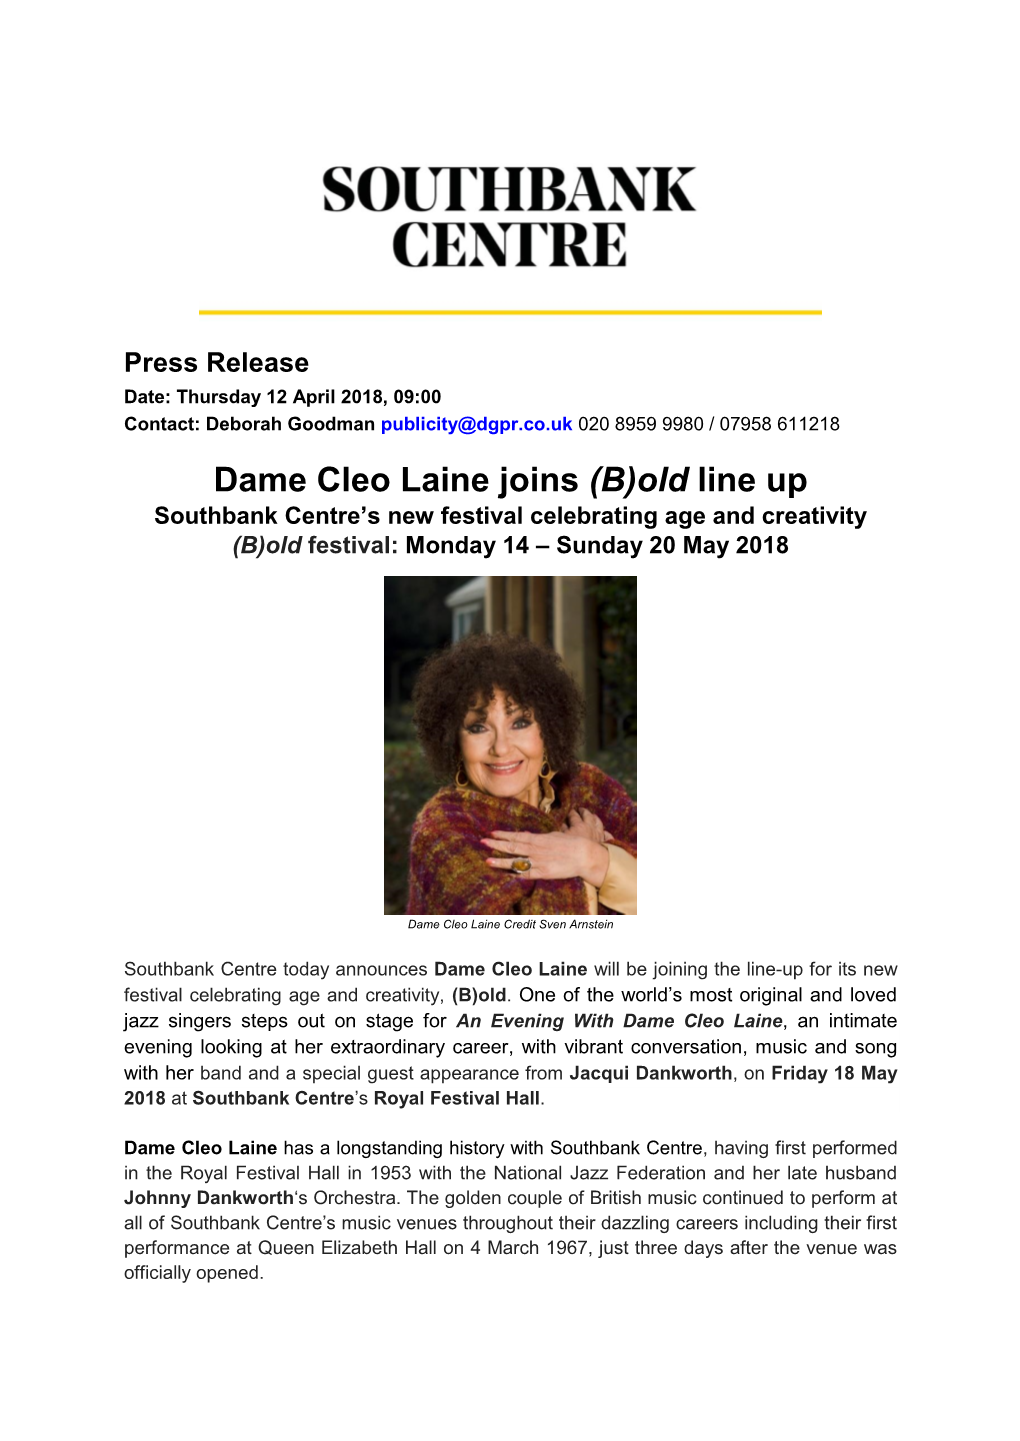 Dame Cleo Laine Joins (B)Old Line up Southbank Centre’S New Festival Celebrating Age and Creativity